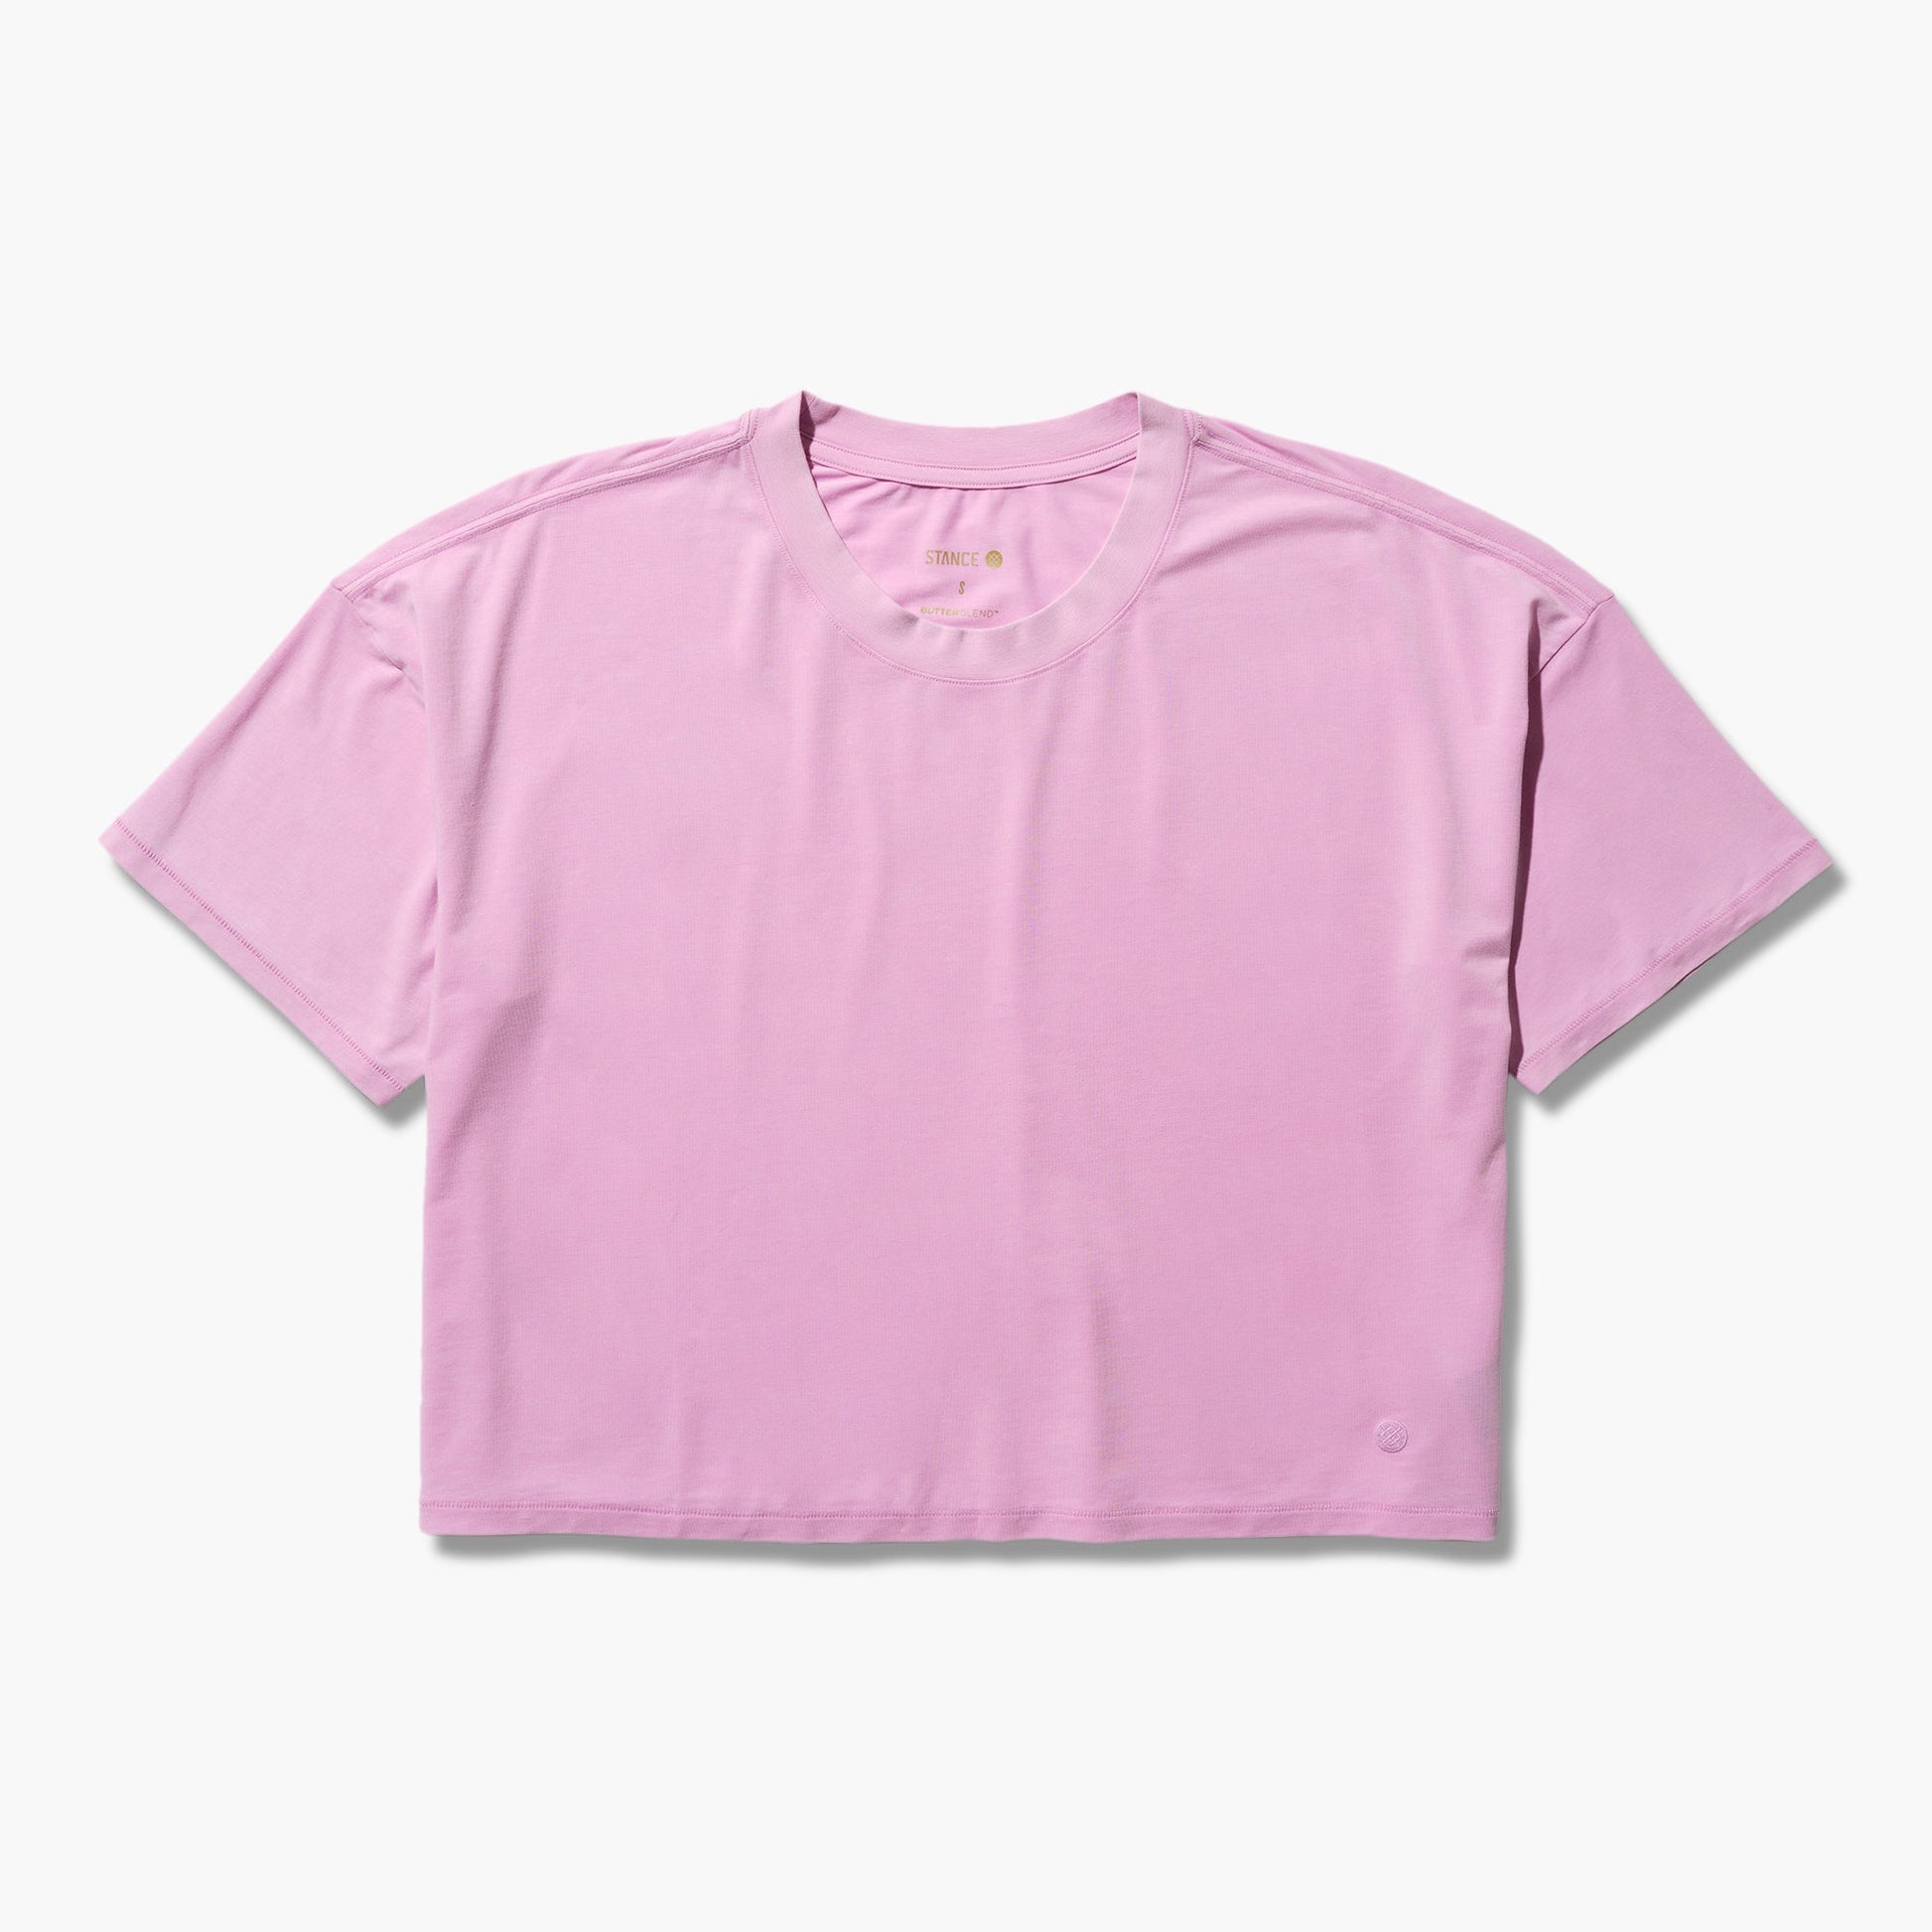 Stance Women's Lay Low Boxy T-Shirt Lilac Ice |model